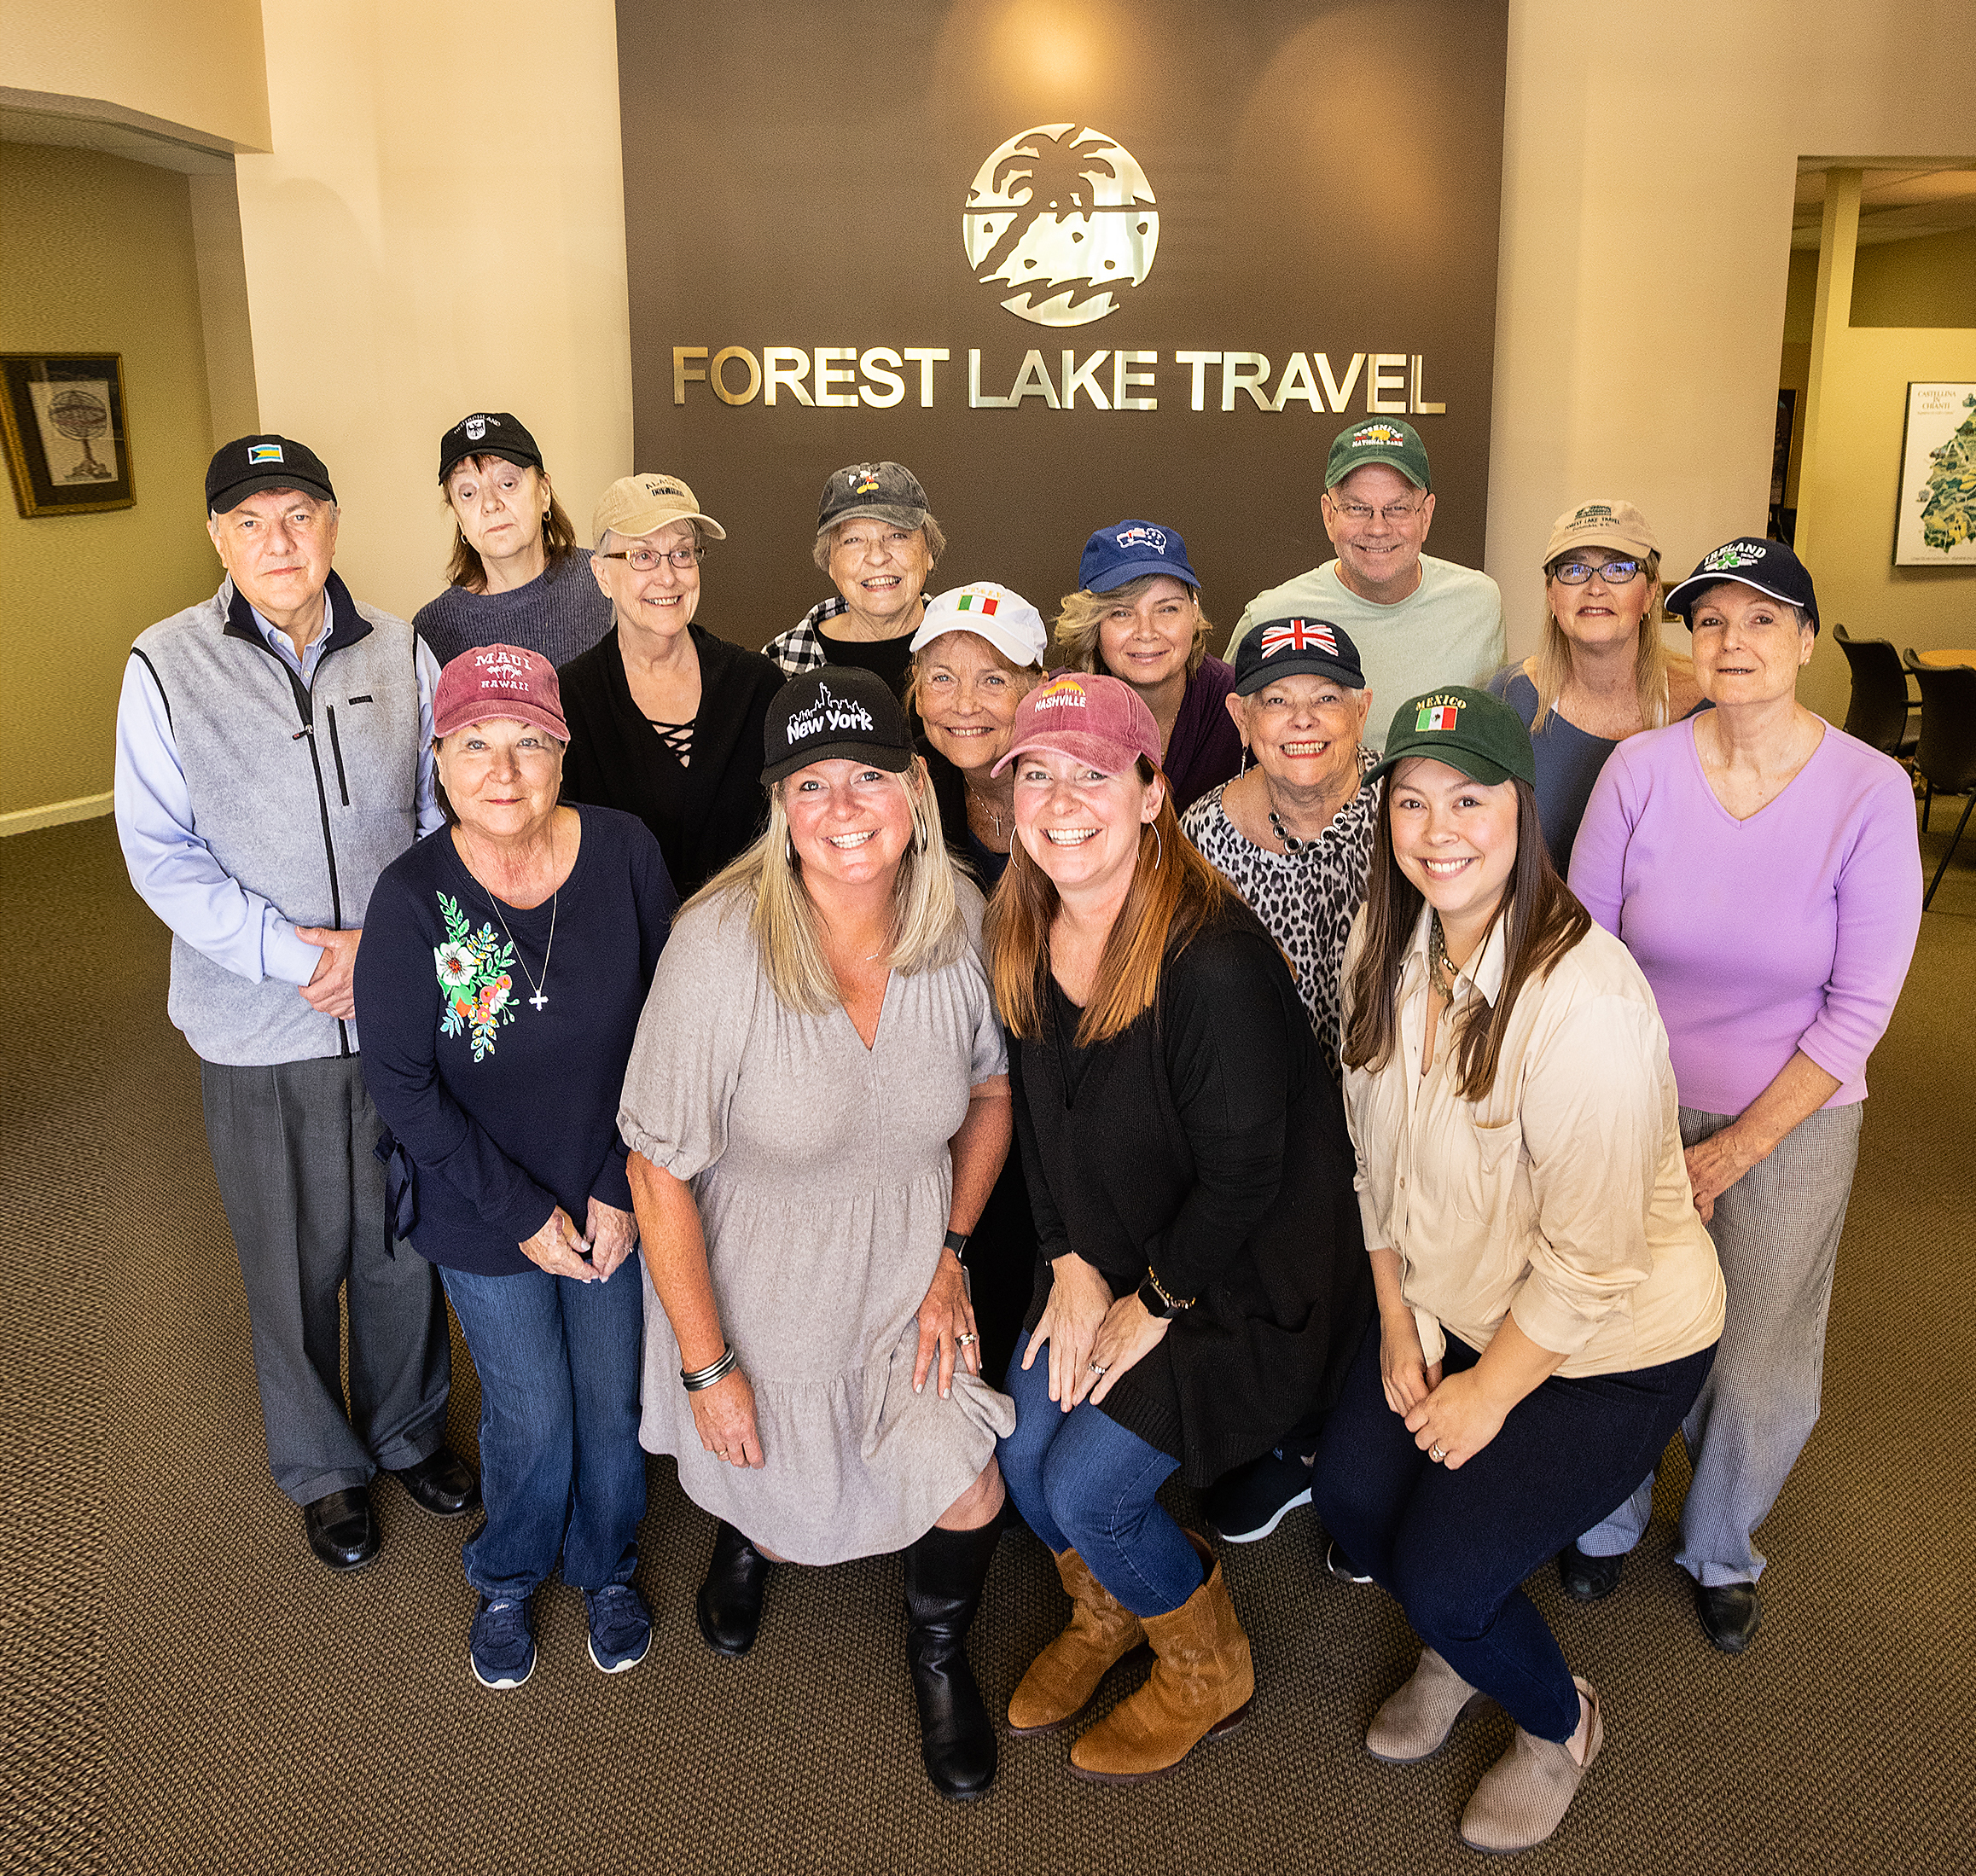 Voted Best Travel Agency, Forest Lake Travel tips their hats to your destination! Back row: Donald, Monika, Lynn, Nancy, Deborah, Shelley, Mary, Rocky, Terrie, Jane. Front row: Margaret, Katie, Marilyn, Daisy.